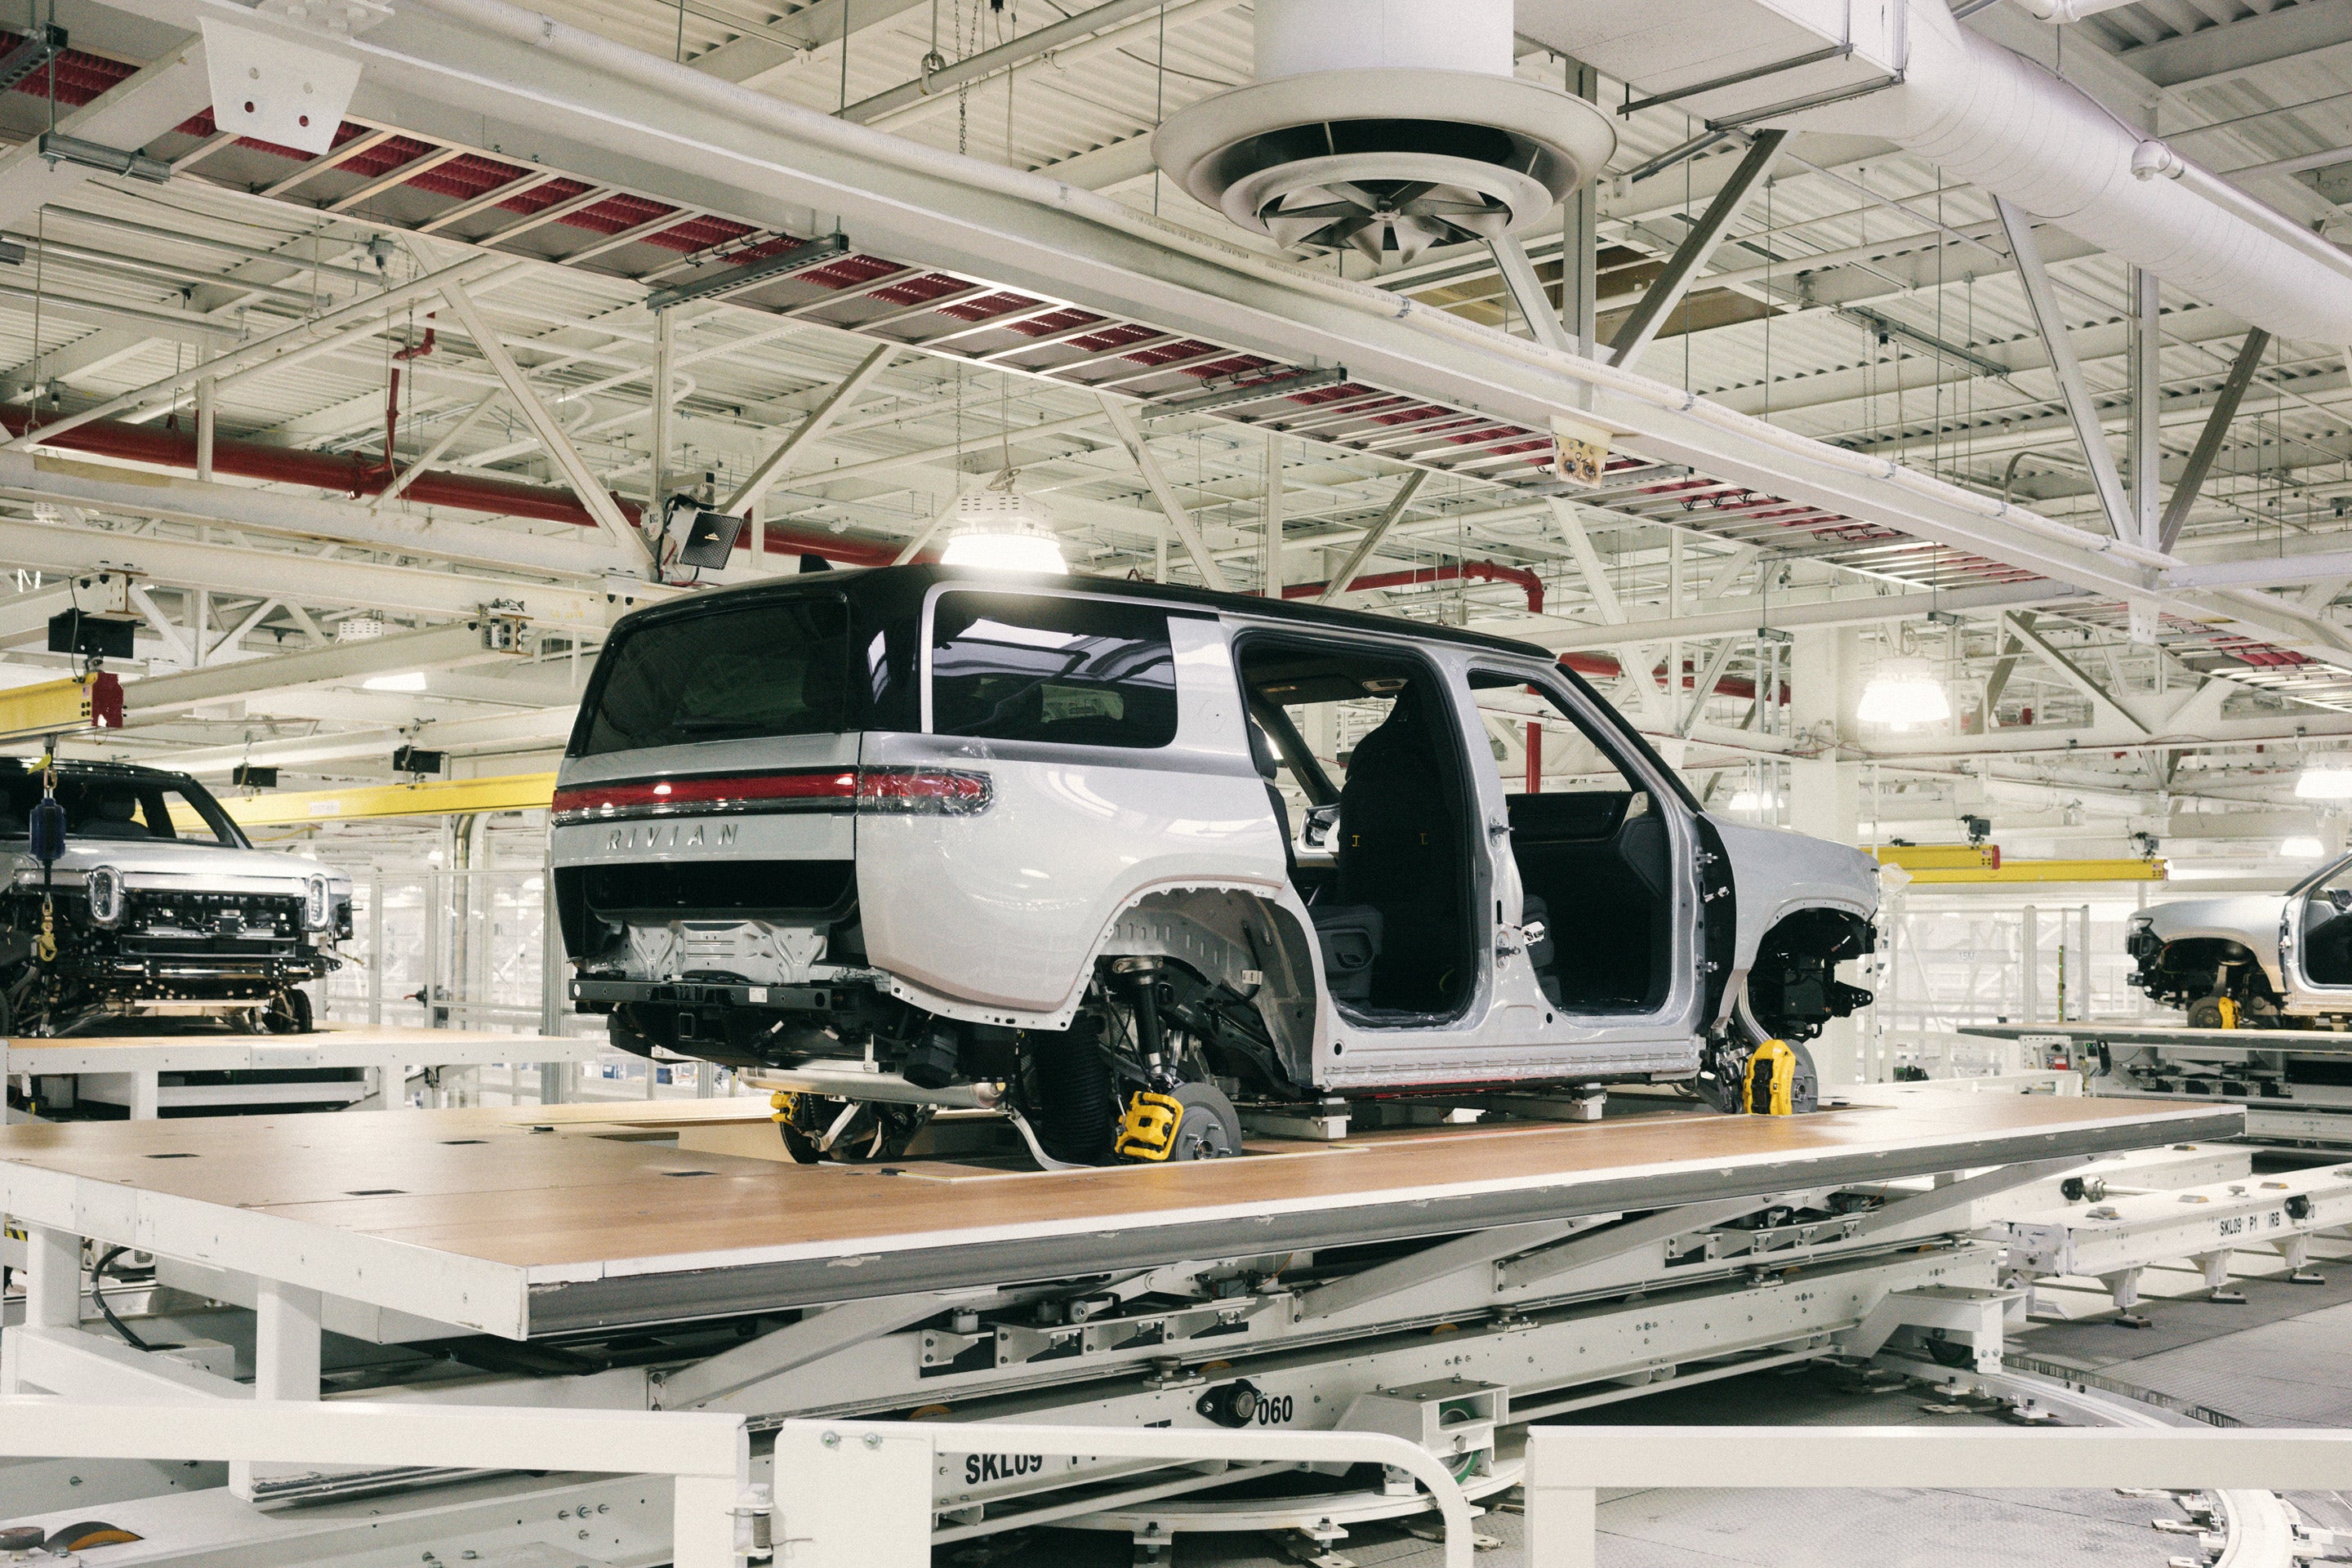 Rivian Q2 Earnings Highlights: Revenue Beat, Production Update And What's Next For EV Manufacturer